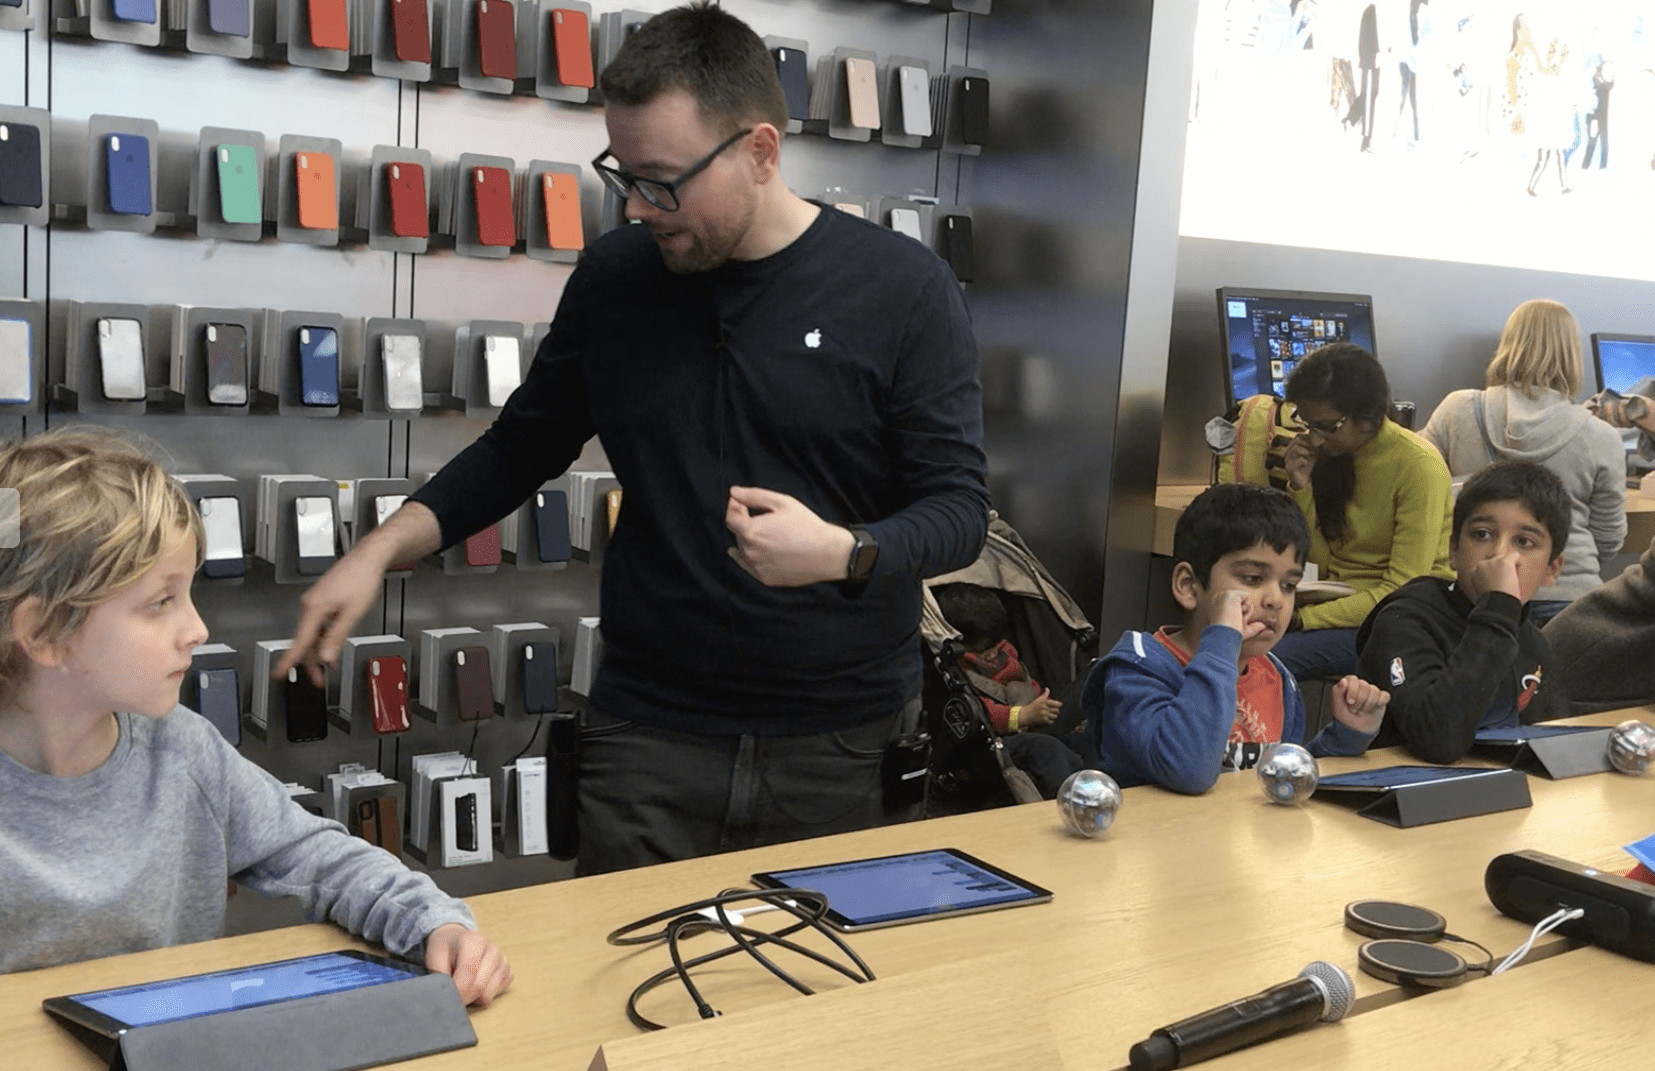 Kingston’s Apple Store to hold ‘Family Camp’ digital skills sessions